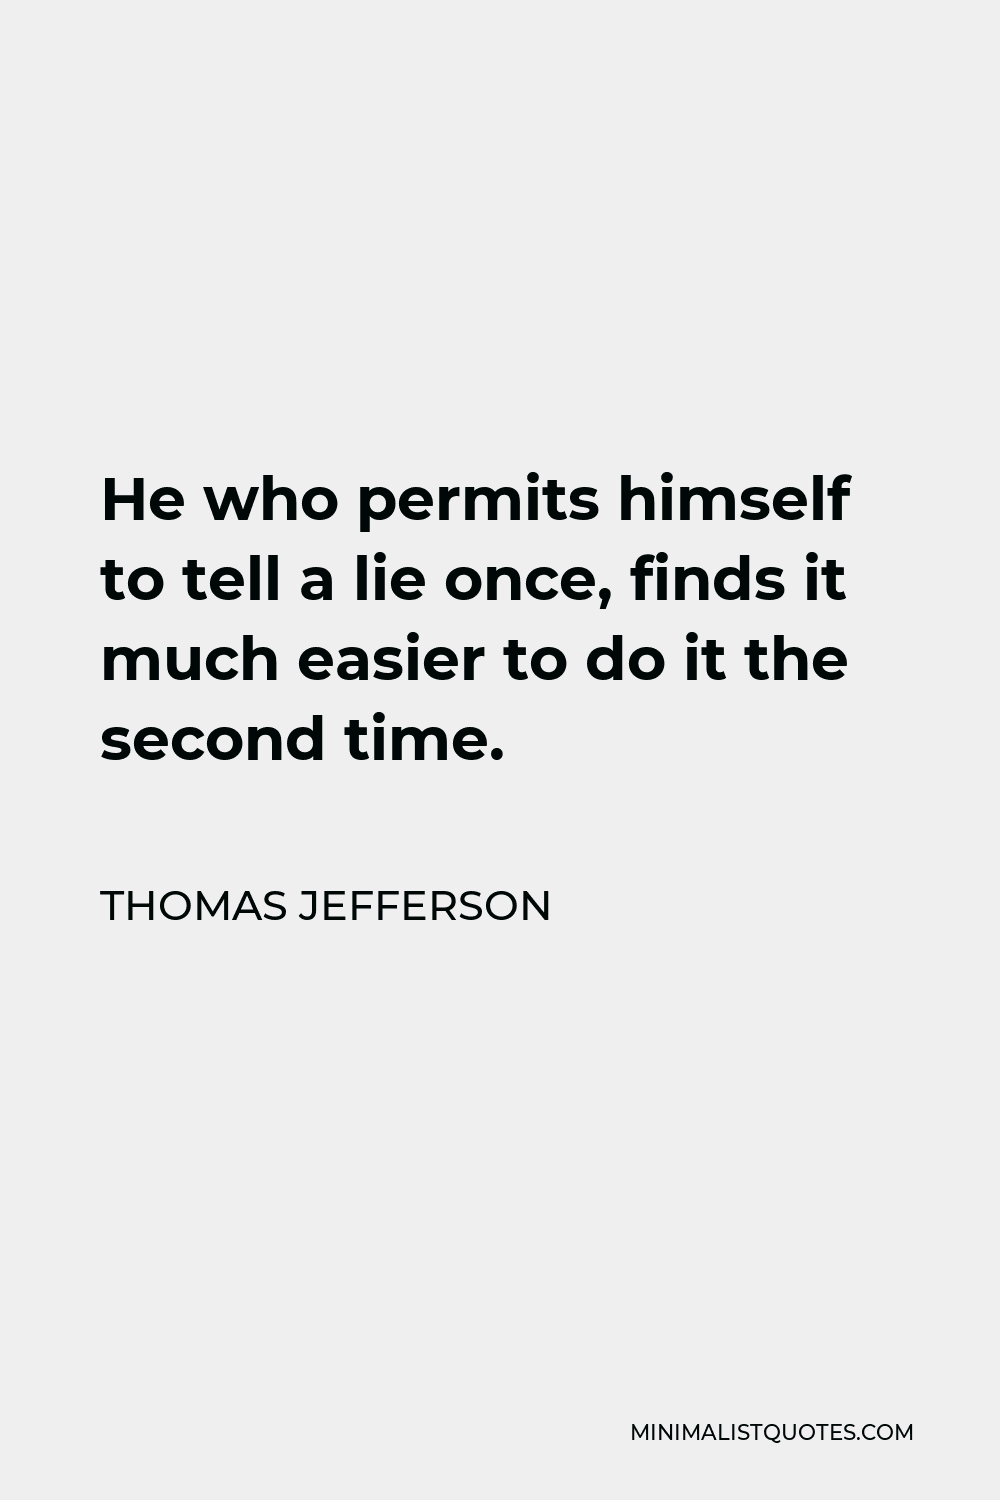 Thomas Jefferson Quote - He who permits himself to tell a lie once, finds it much easier to do it the second time.